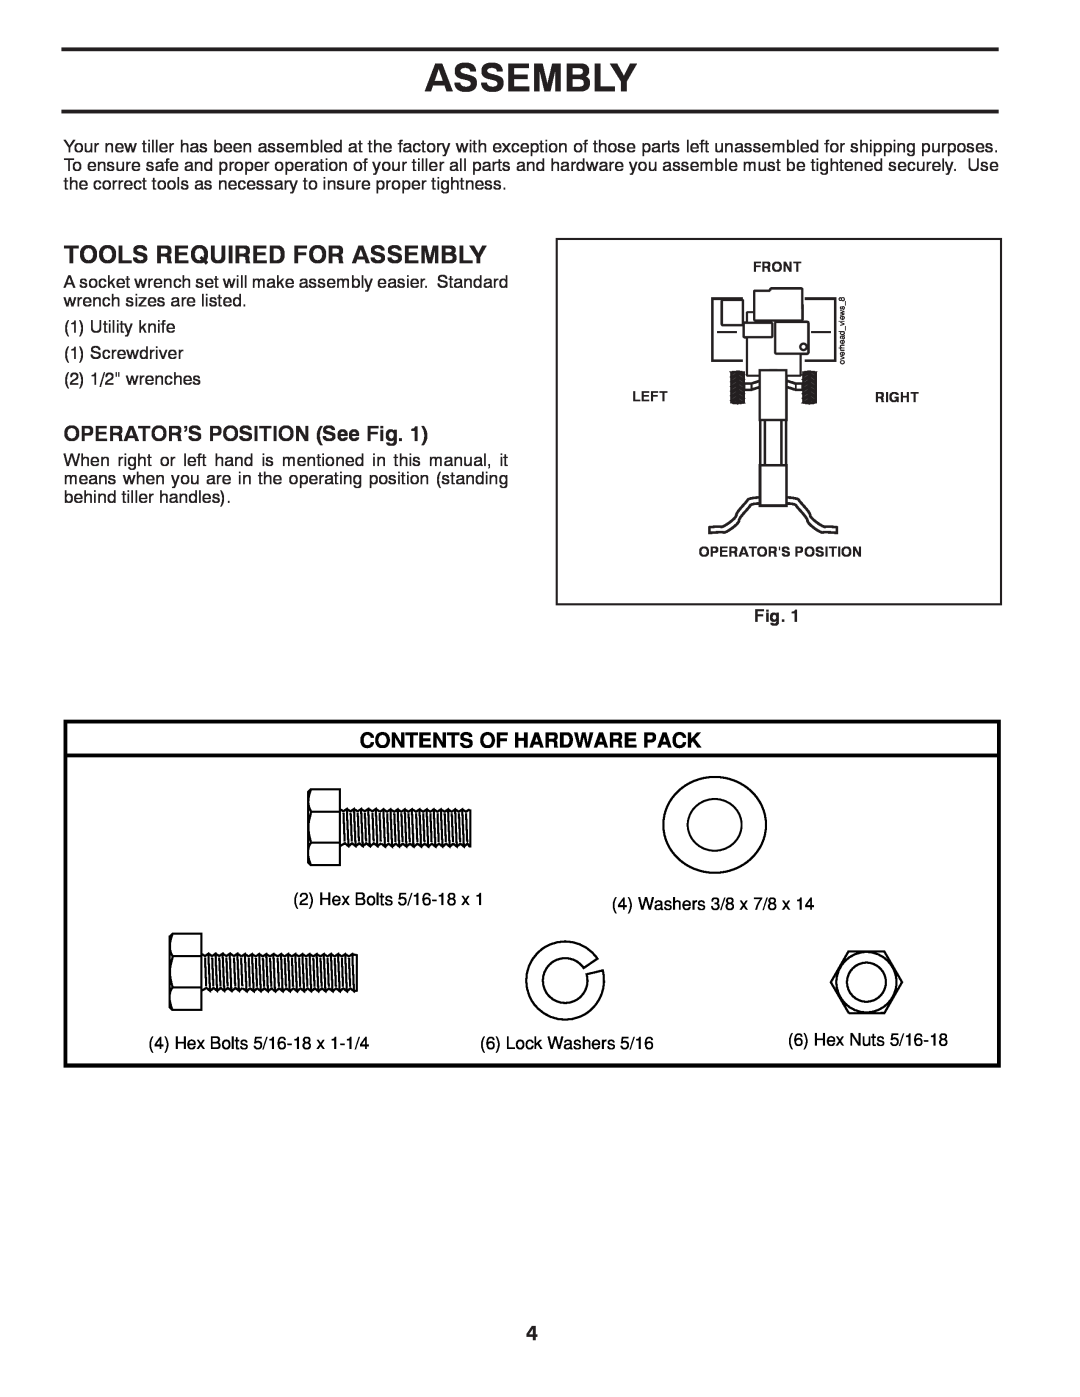 Poulan HDF900 manual Tools Required For Assembly, OPERATOR’S POSITION See Fig, Contents Of Hardware Pack 